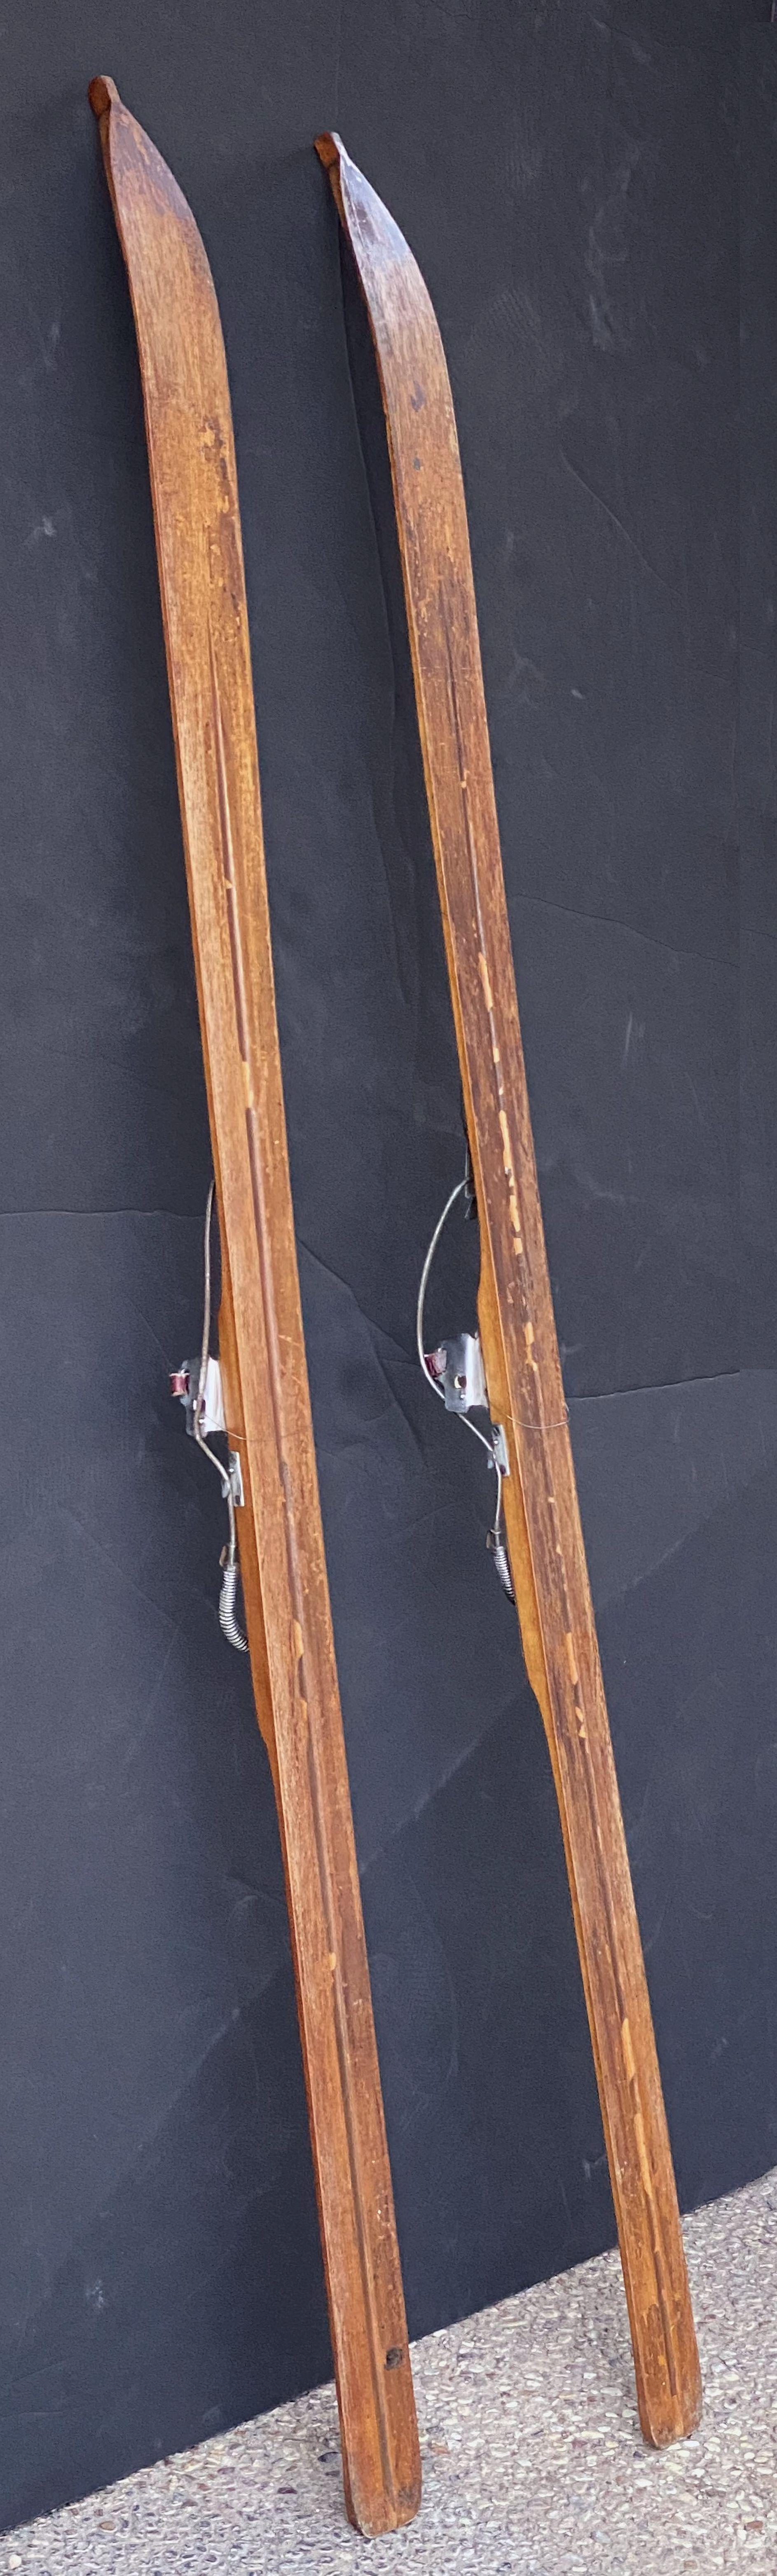 Pair of Vintage French Wooden Skis with Bamboo Skiing Poles 13